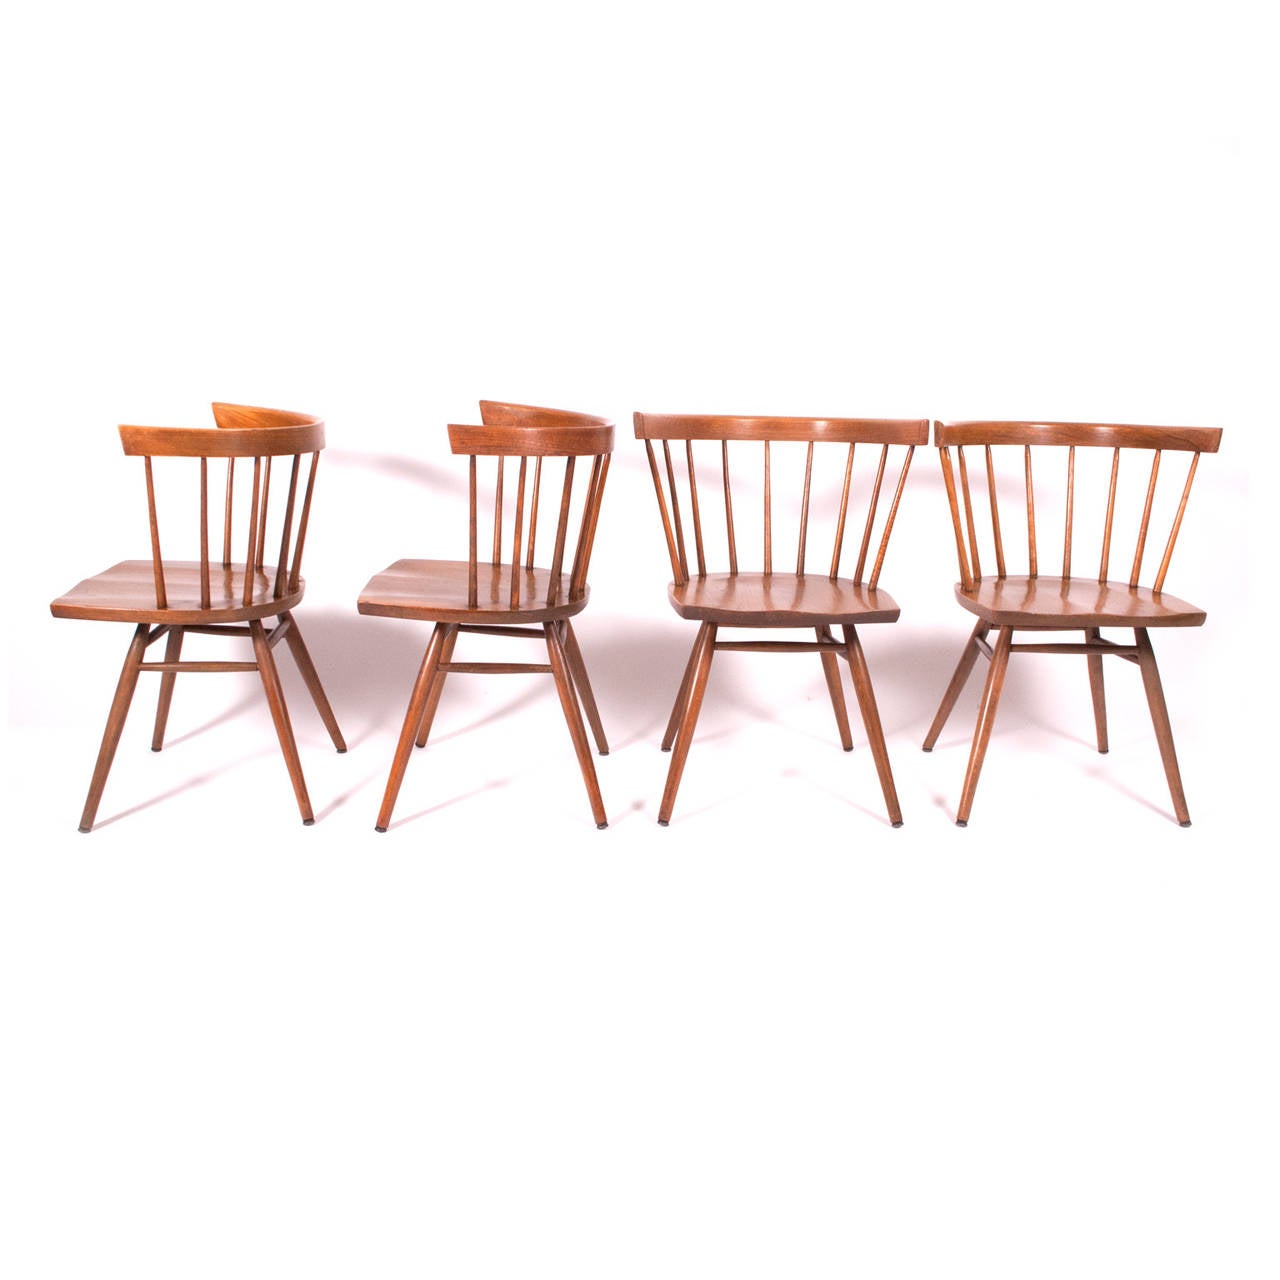 Straight Chairs by George Nakashima attributed ,hand made beechwood legs and ash wood seats / back. Definitely 50 to 70 years old